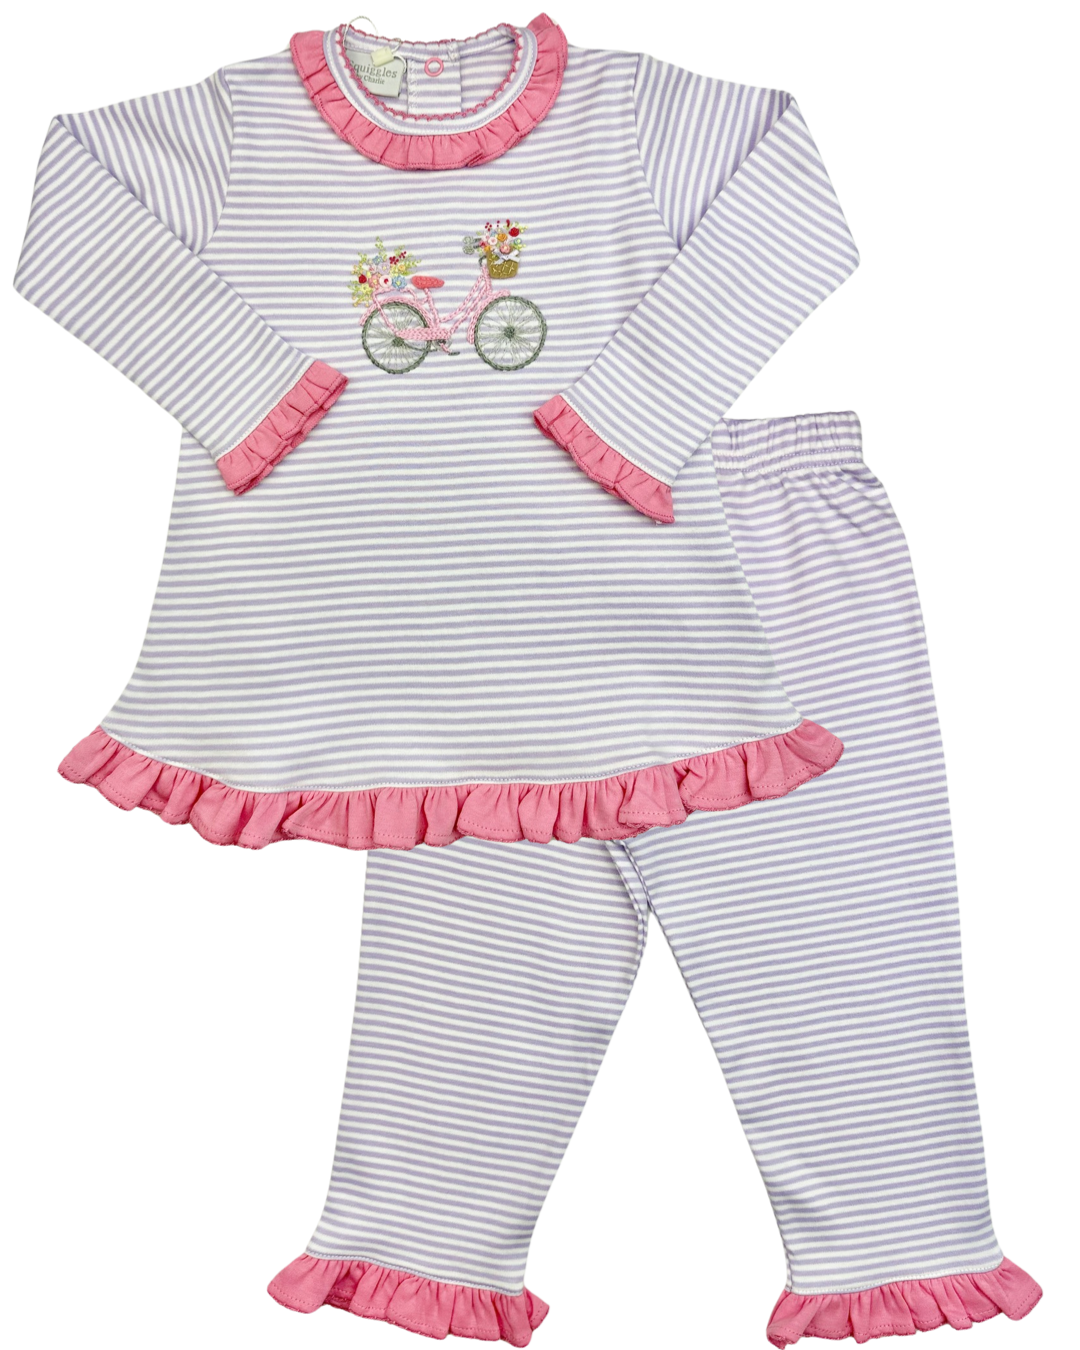 Bicycle & Flowers Ruffled Pant Set (2T,3T,4T)